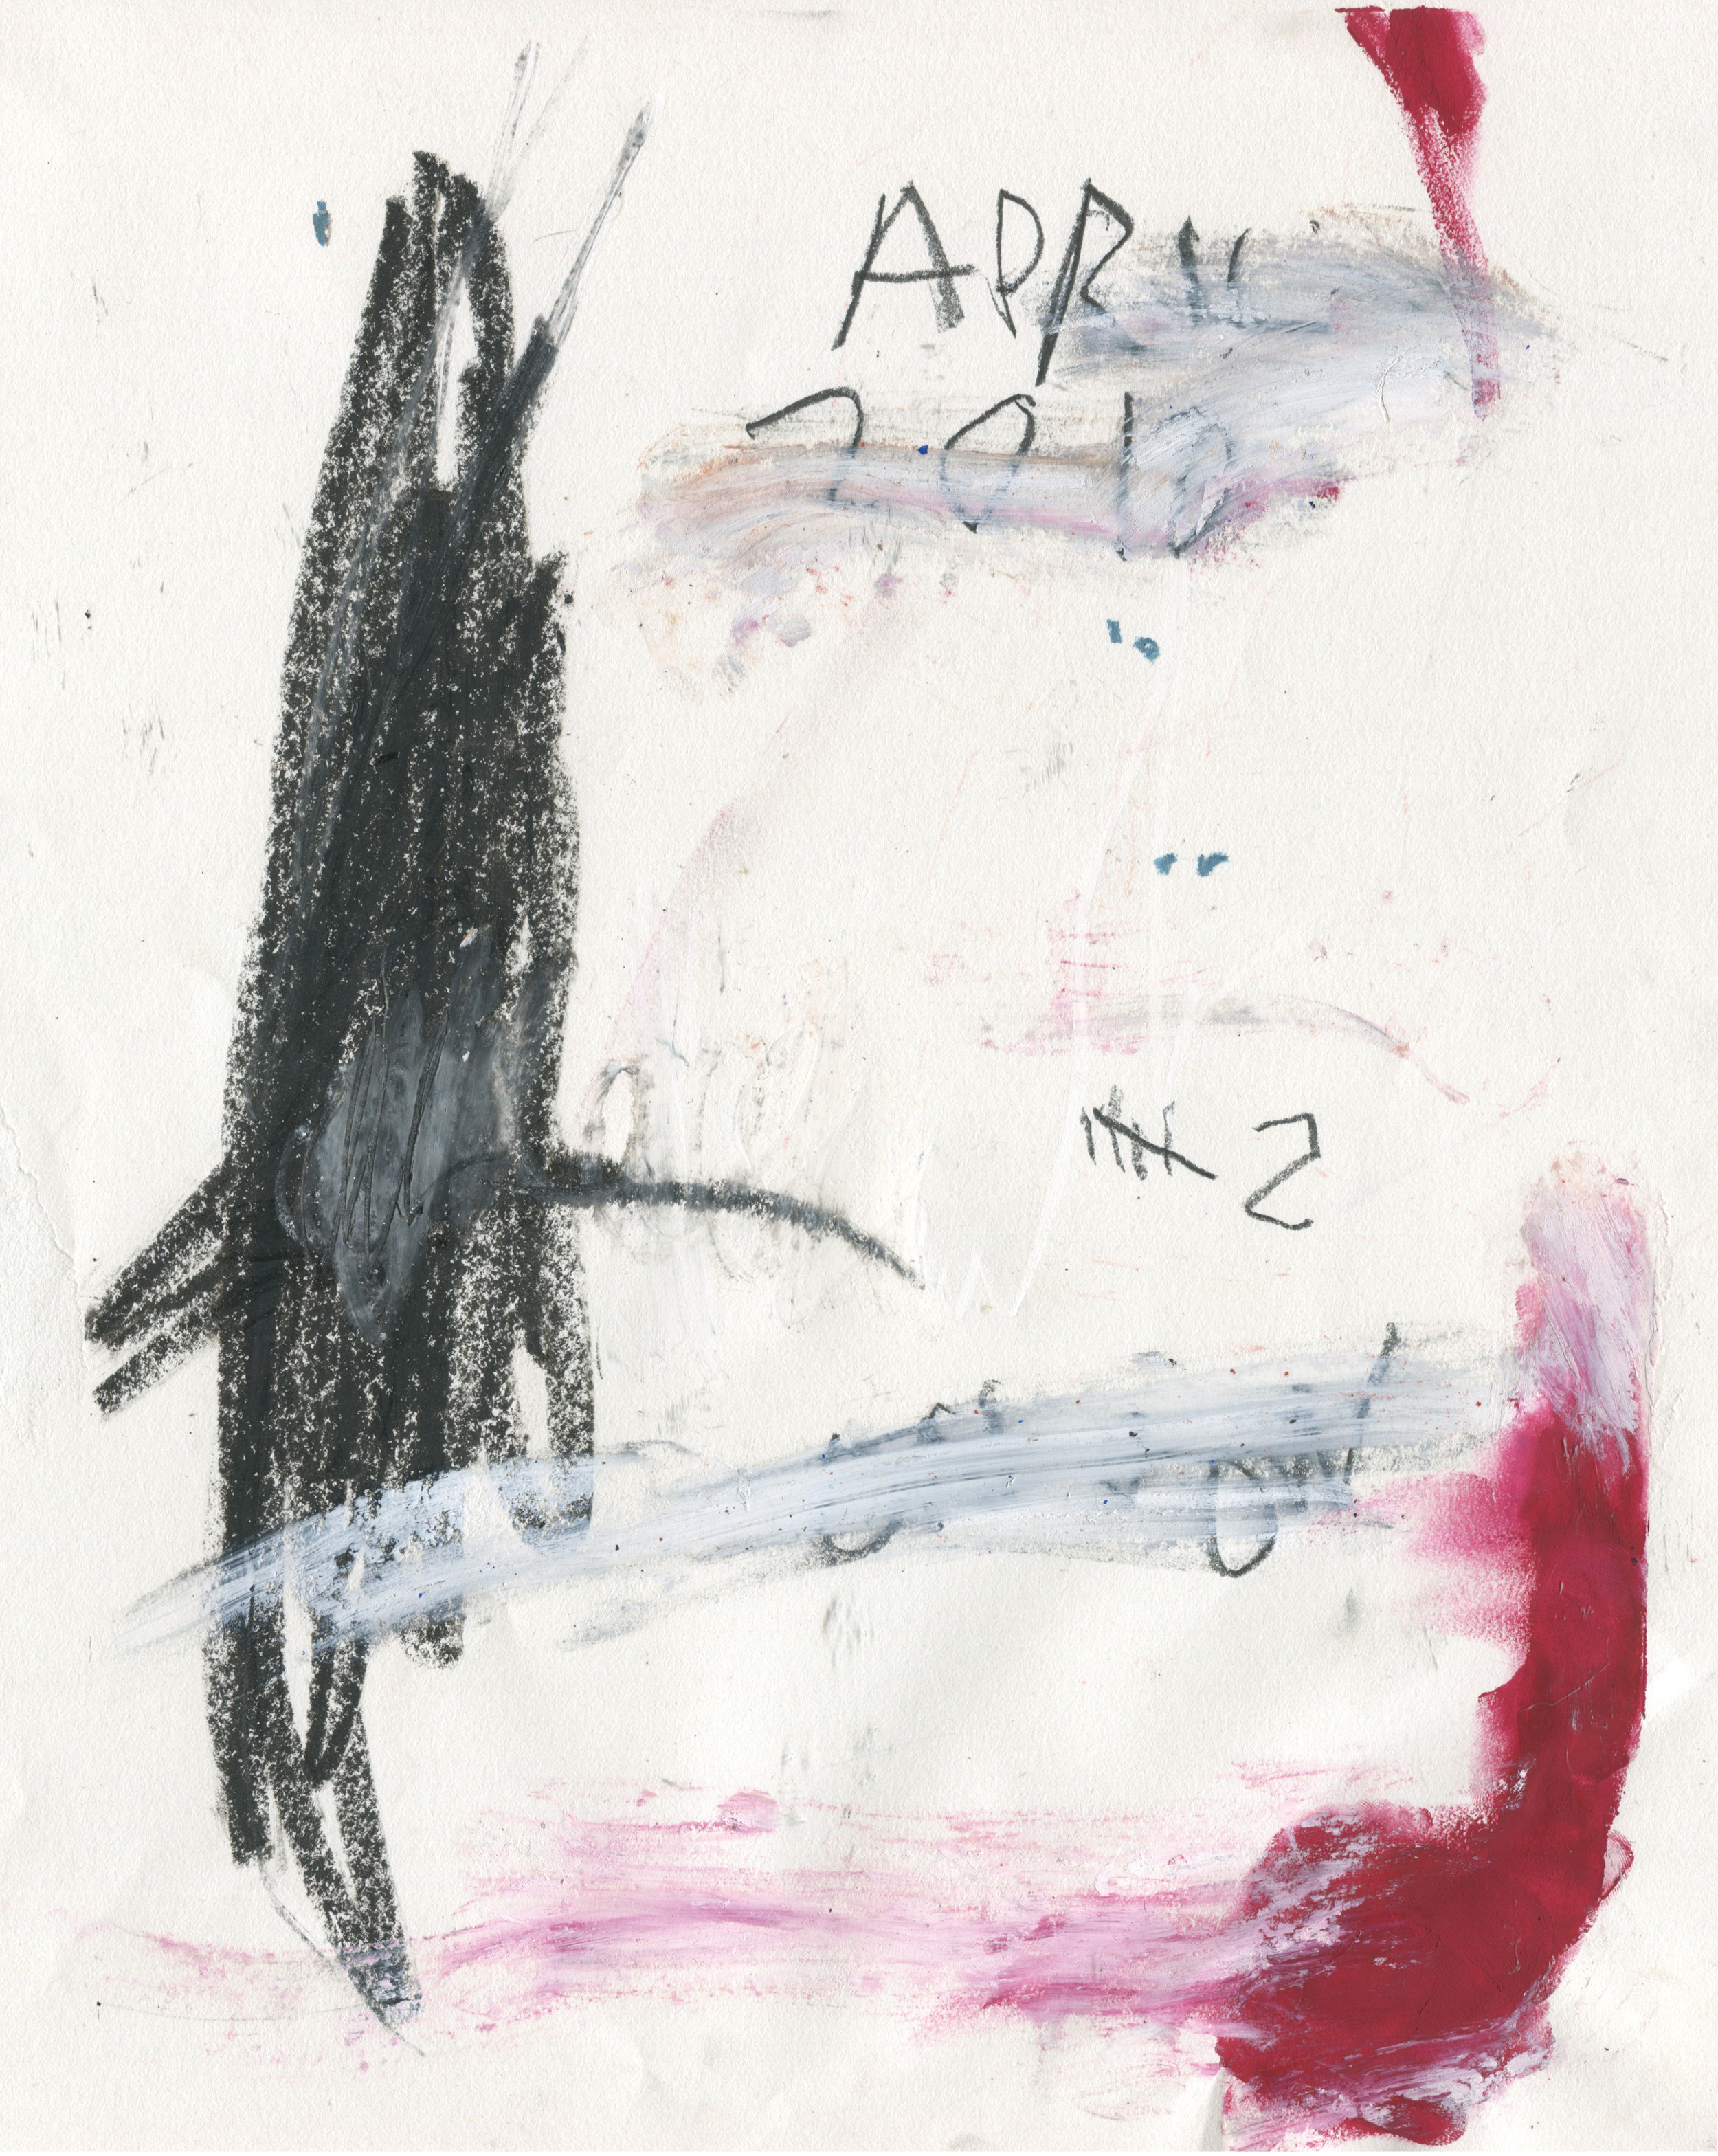   VI , 2016  14 x 11 inches  Crayon, Gouache, Oil Stick, Crayon, Chalk Pastel, and Graphite on Paper  Private Collection   